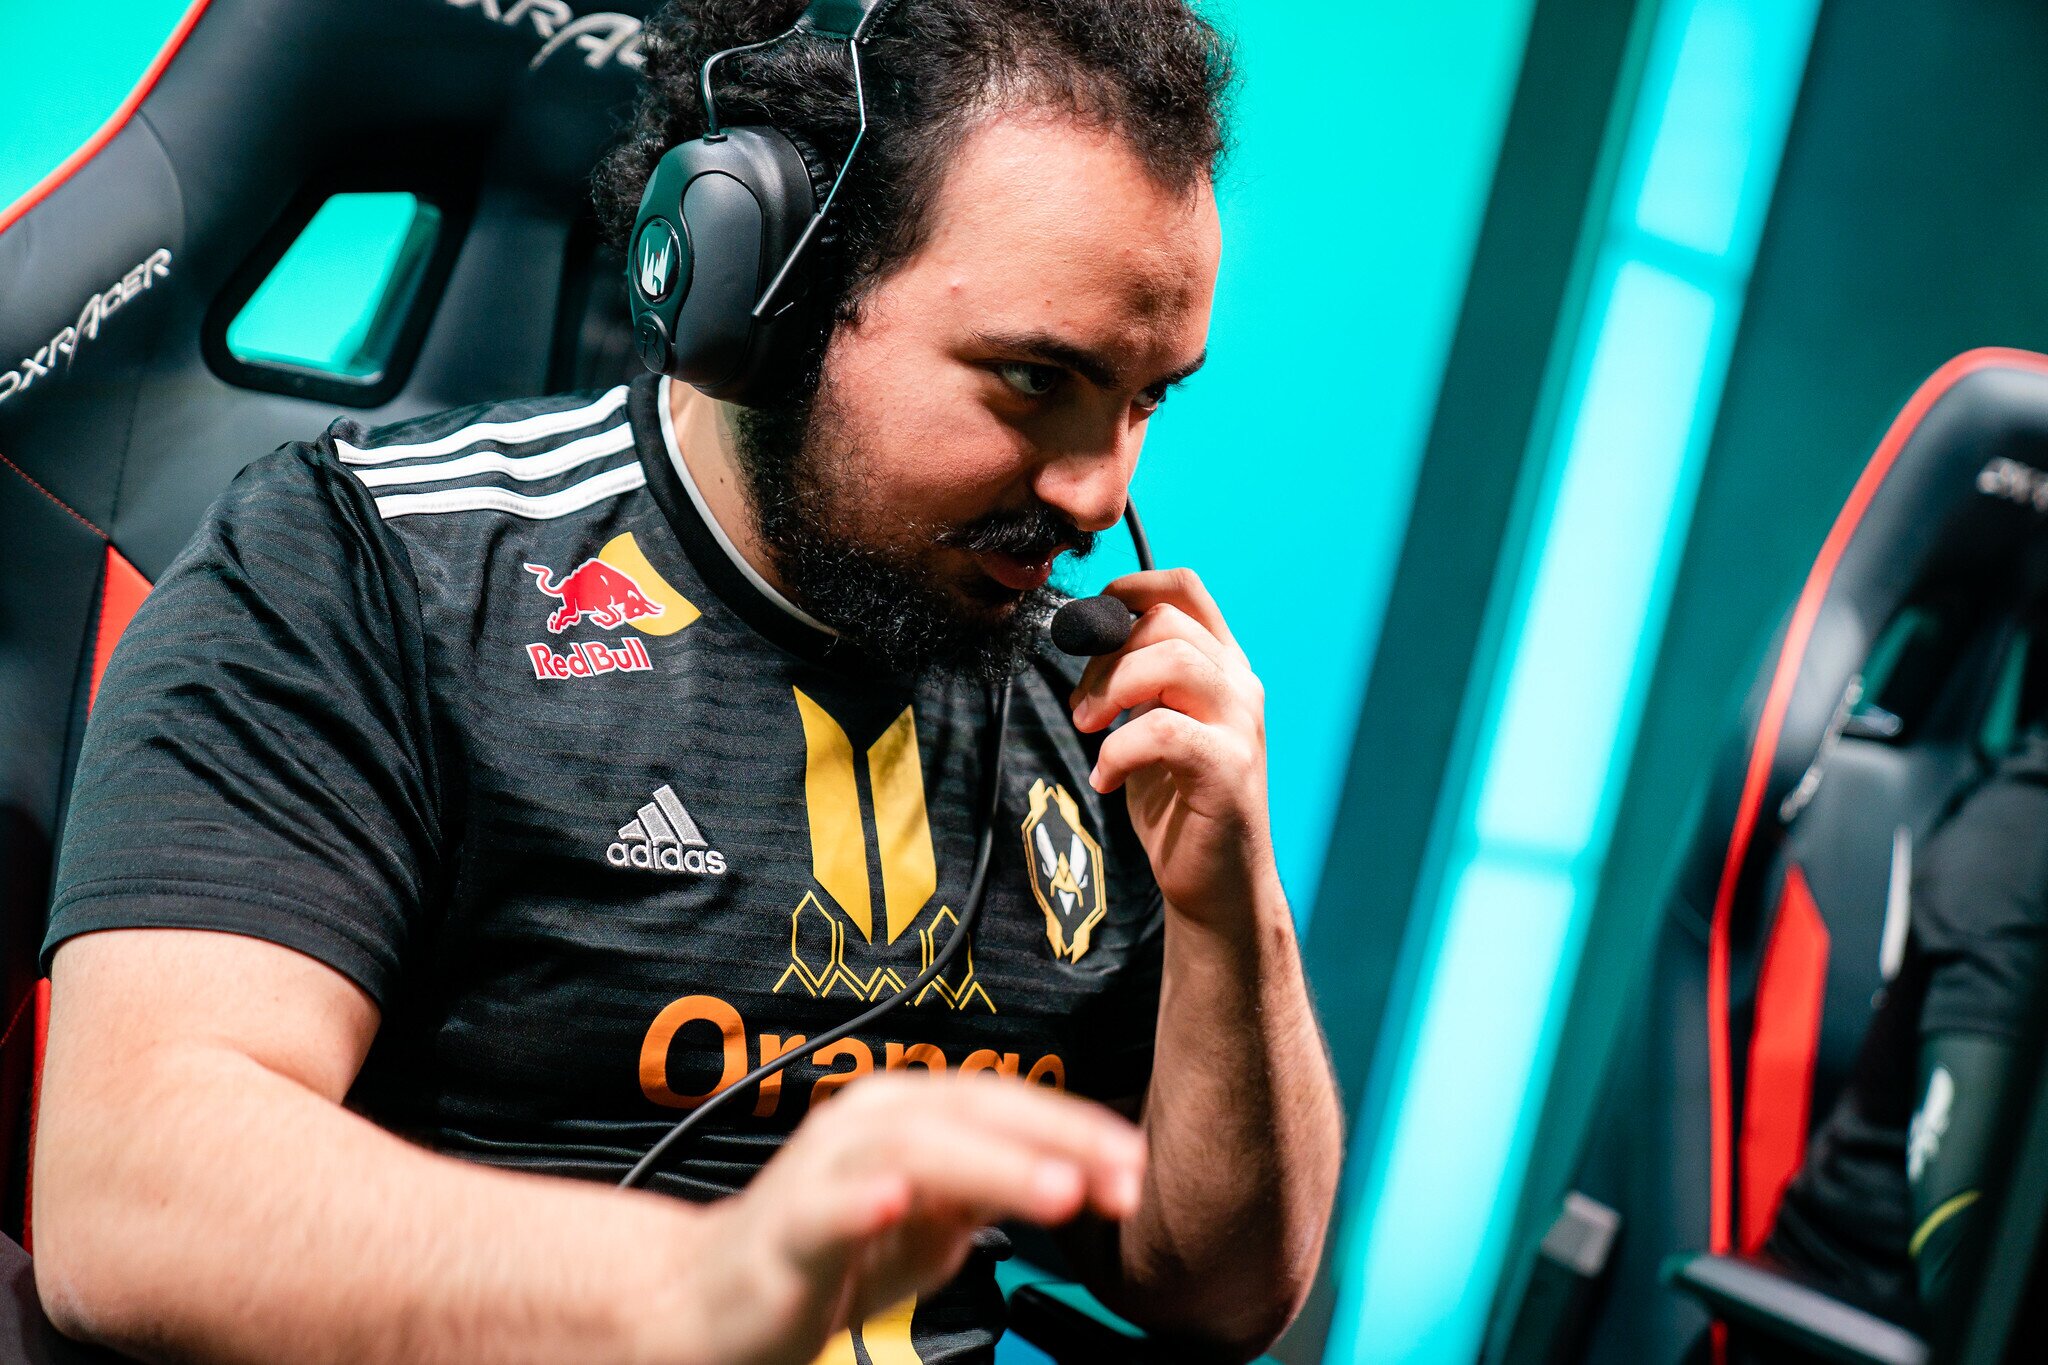 Team Vitality rallied late in the season to push for a top six finish in the LEC. (Image via Riot Games)